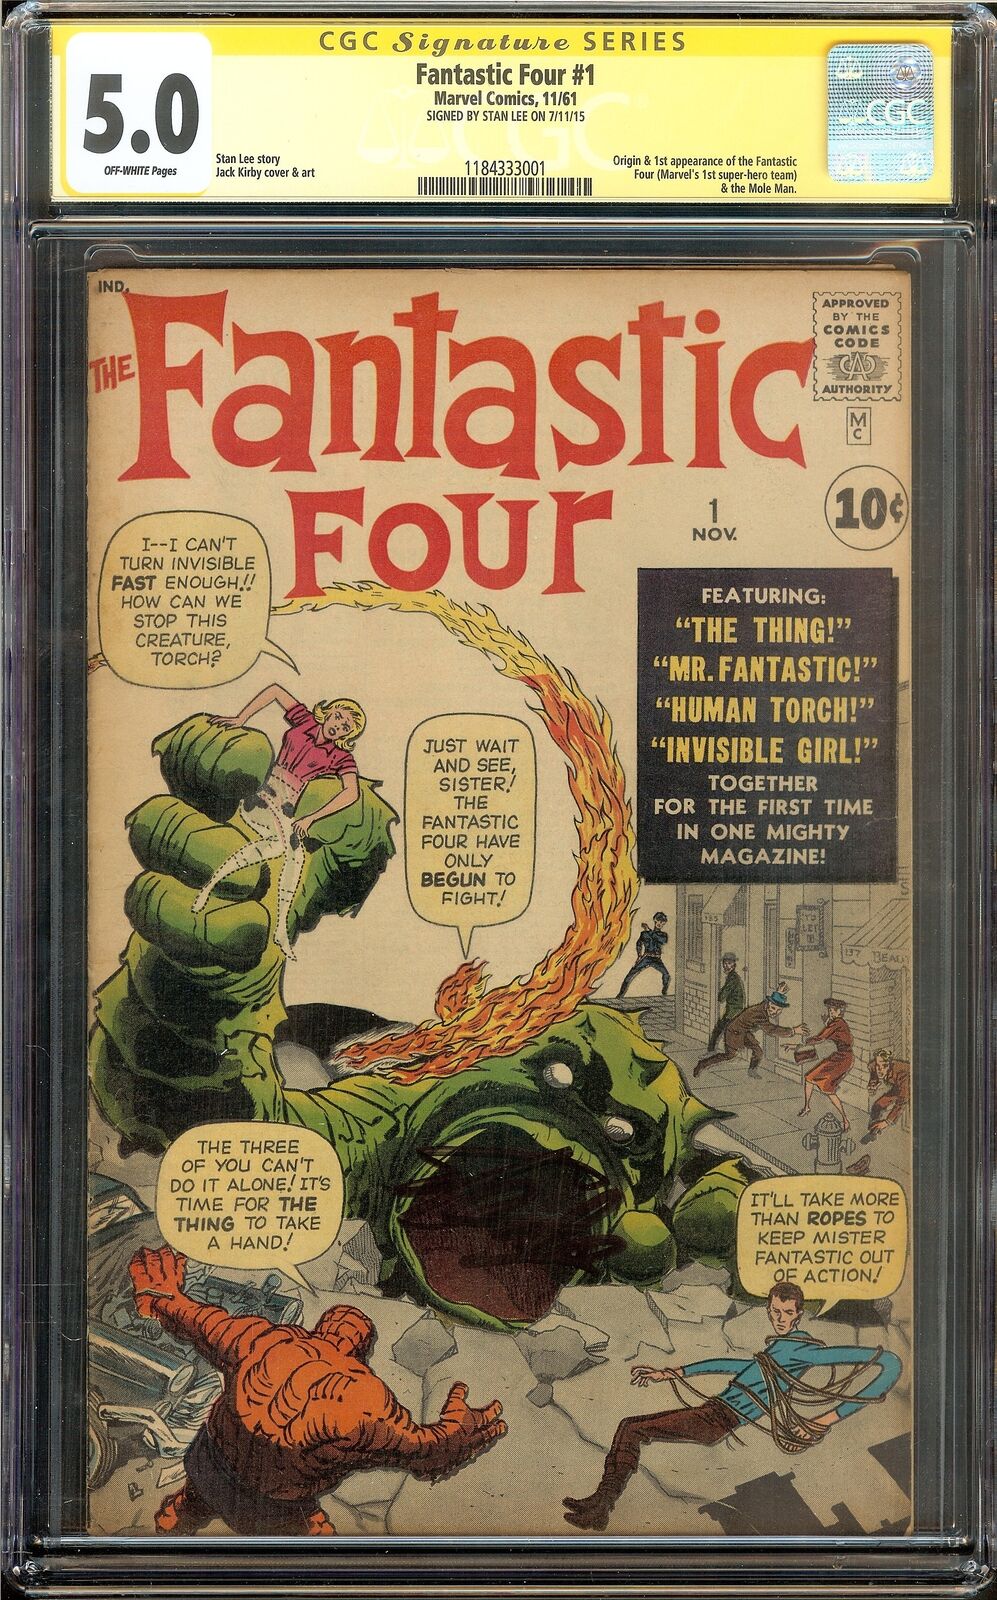 Fantastic Four, Vol. 1 #1 (1961) CGC 5.0 VG/FN SIGNED by STAN LEE 1st team app.